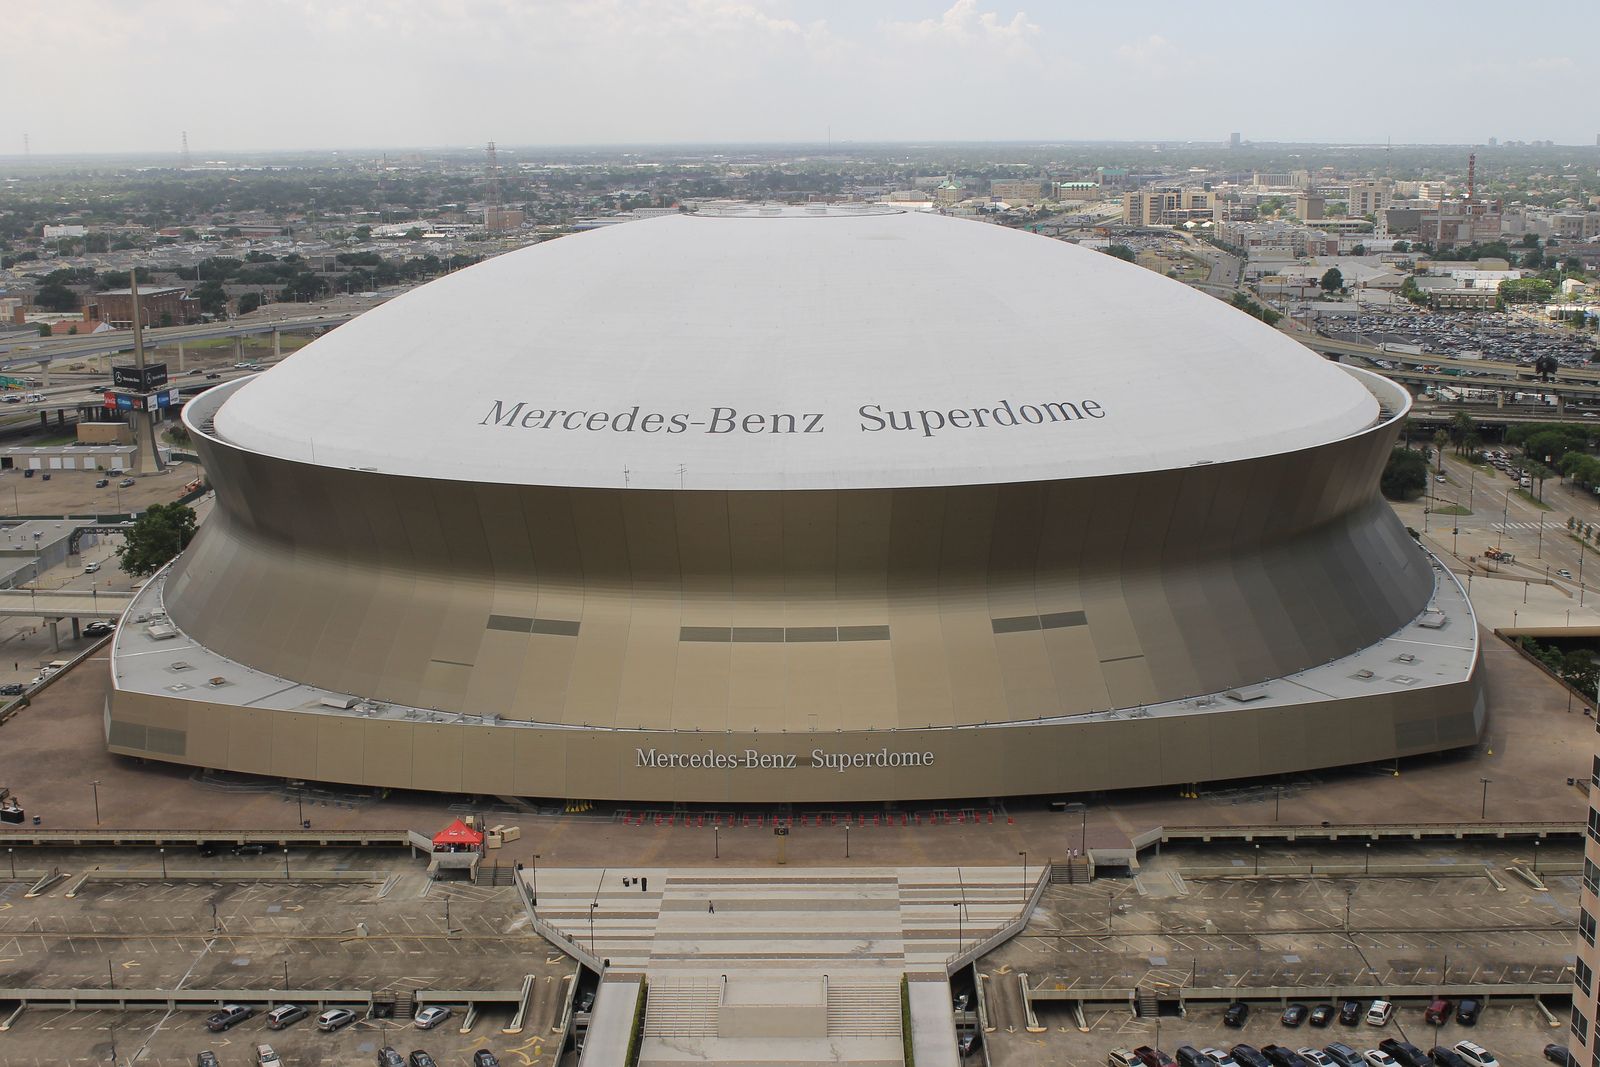 Where is mercedes benz superdome #2